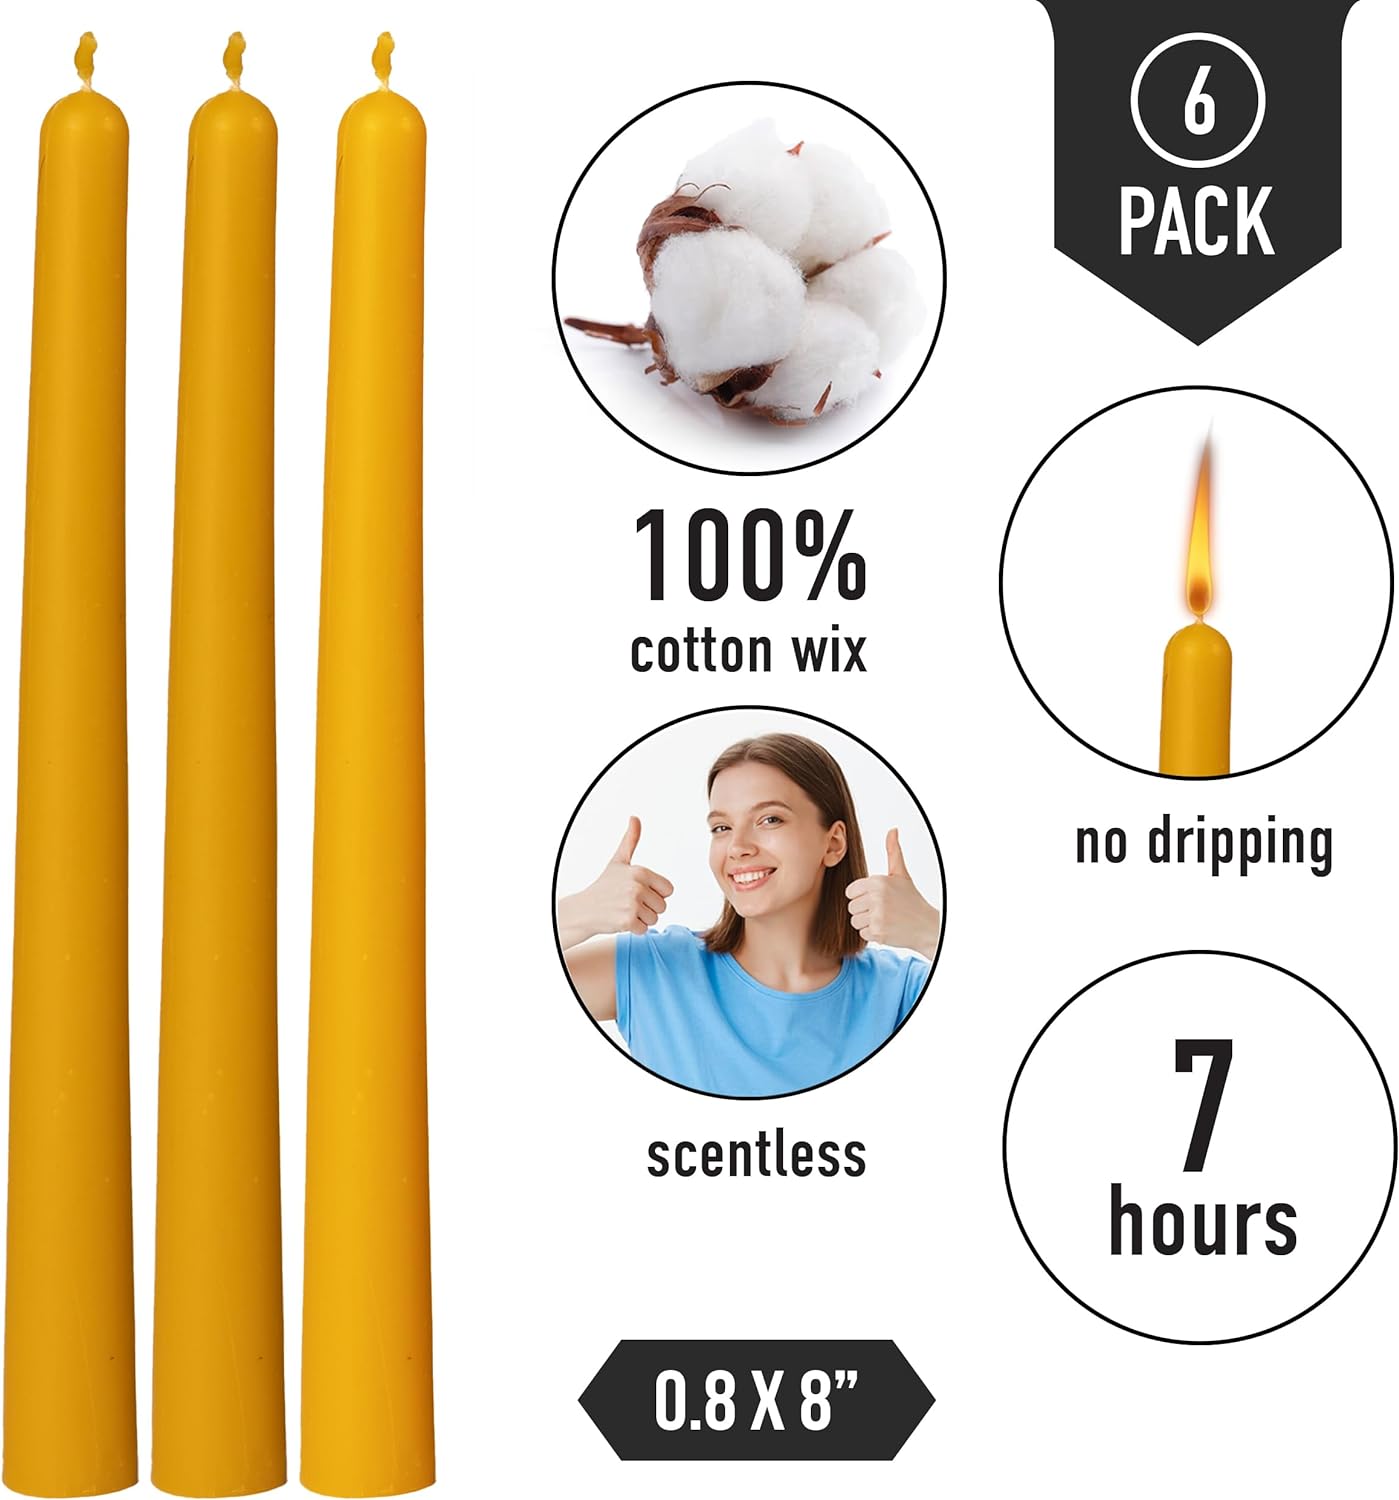 Set of 6 Pure Beeswax Taper Candle - Handmade 100% Pure Beeswax and Cotton Wick - Long Unscented Dinner Candle - Candle Lovers Gift